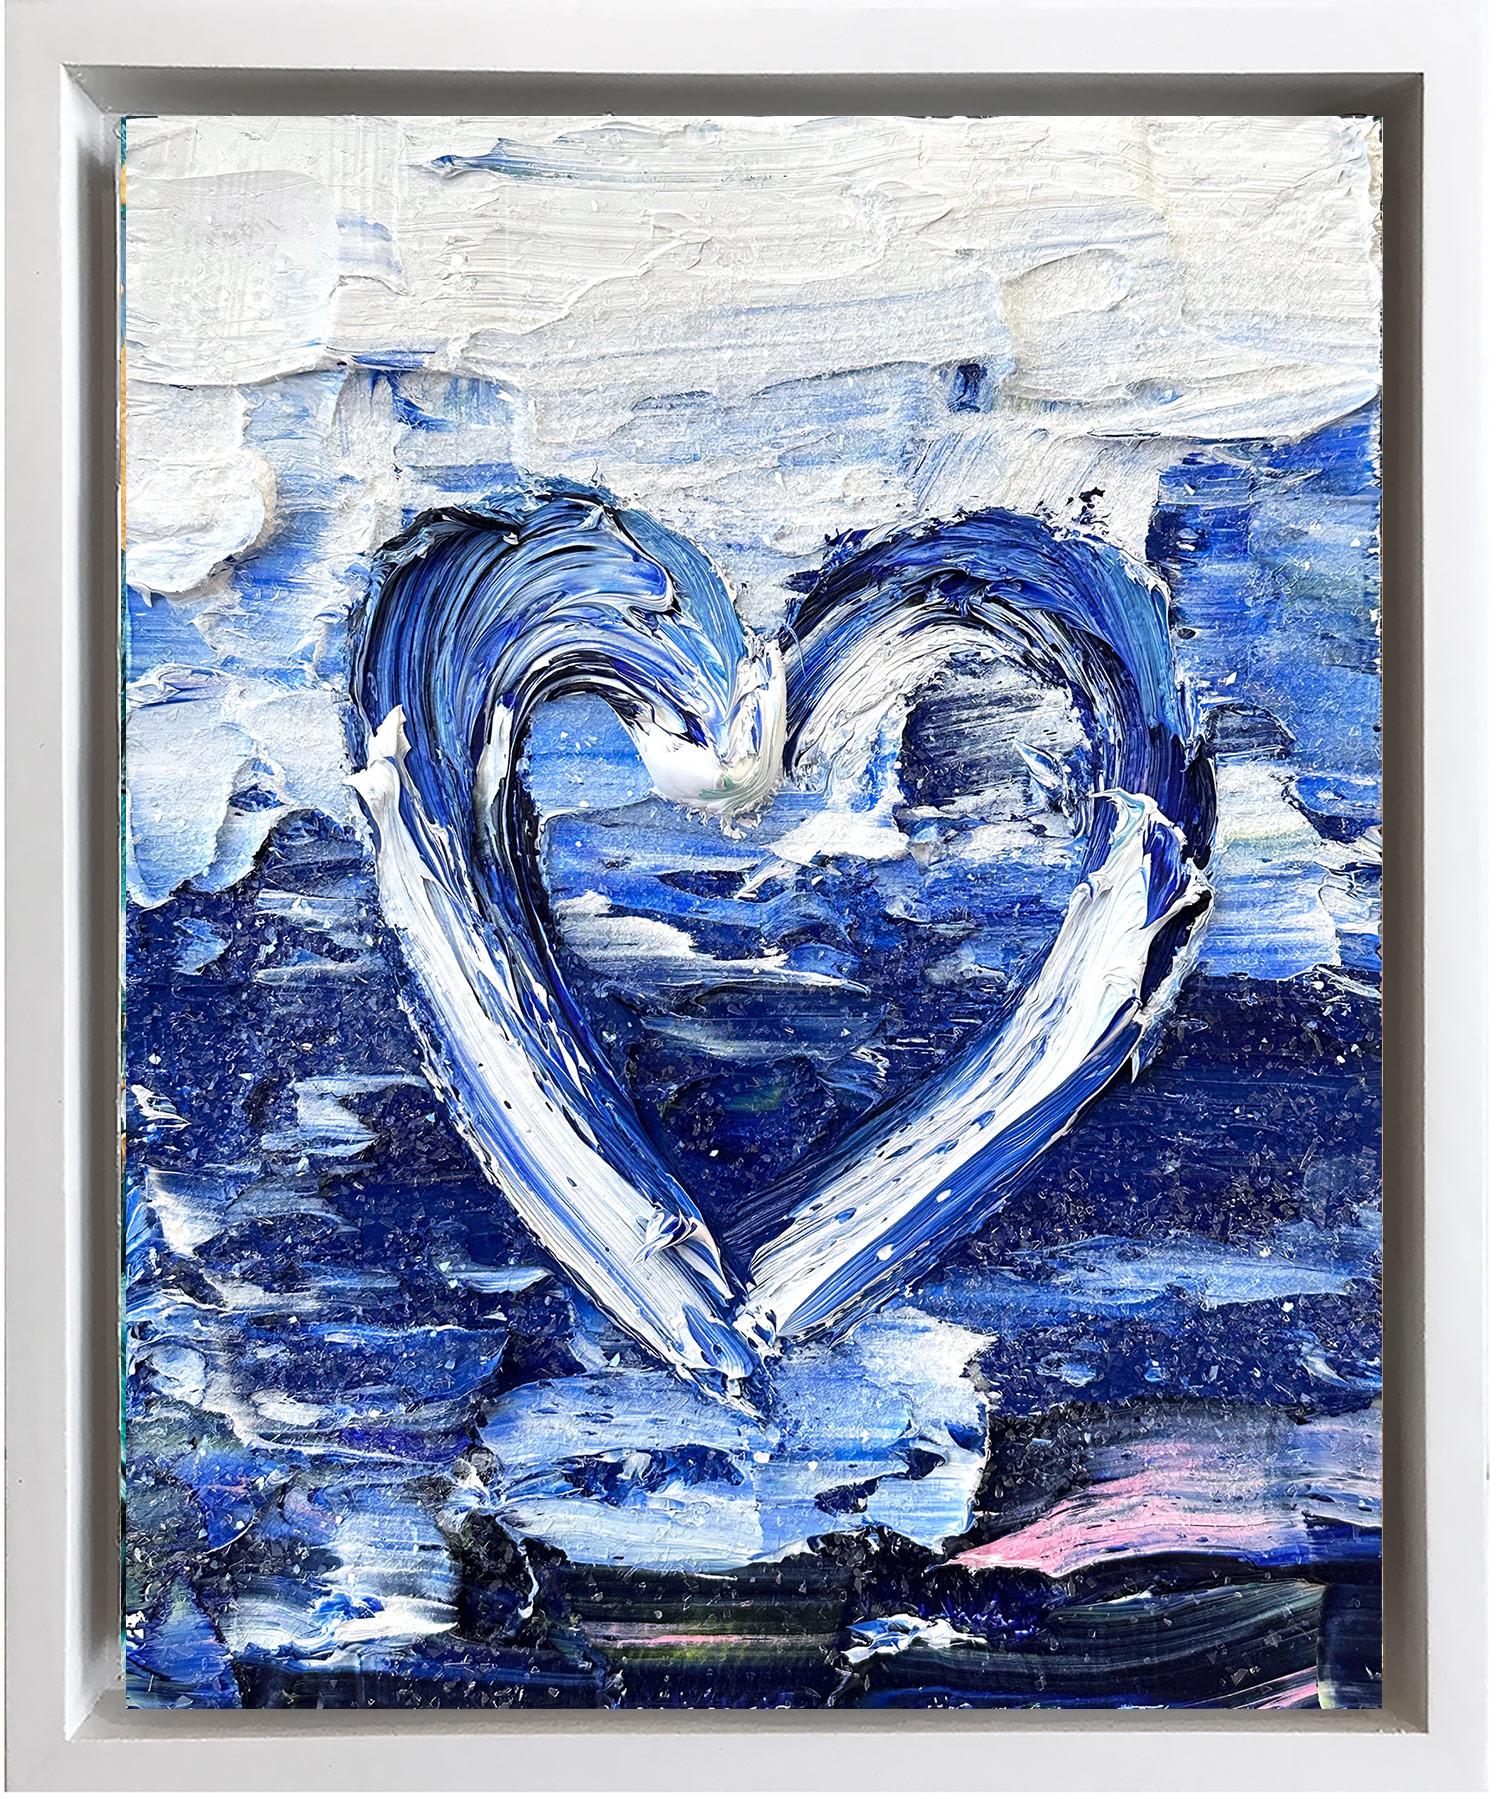 Cindy Shaoul Abstract Painting - "My Heart of The Ocean" Contemporary Pop Art Oil Painting with Floater Frame